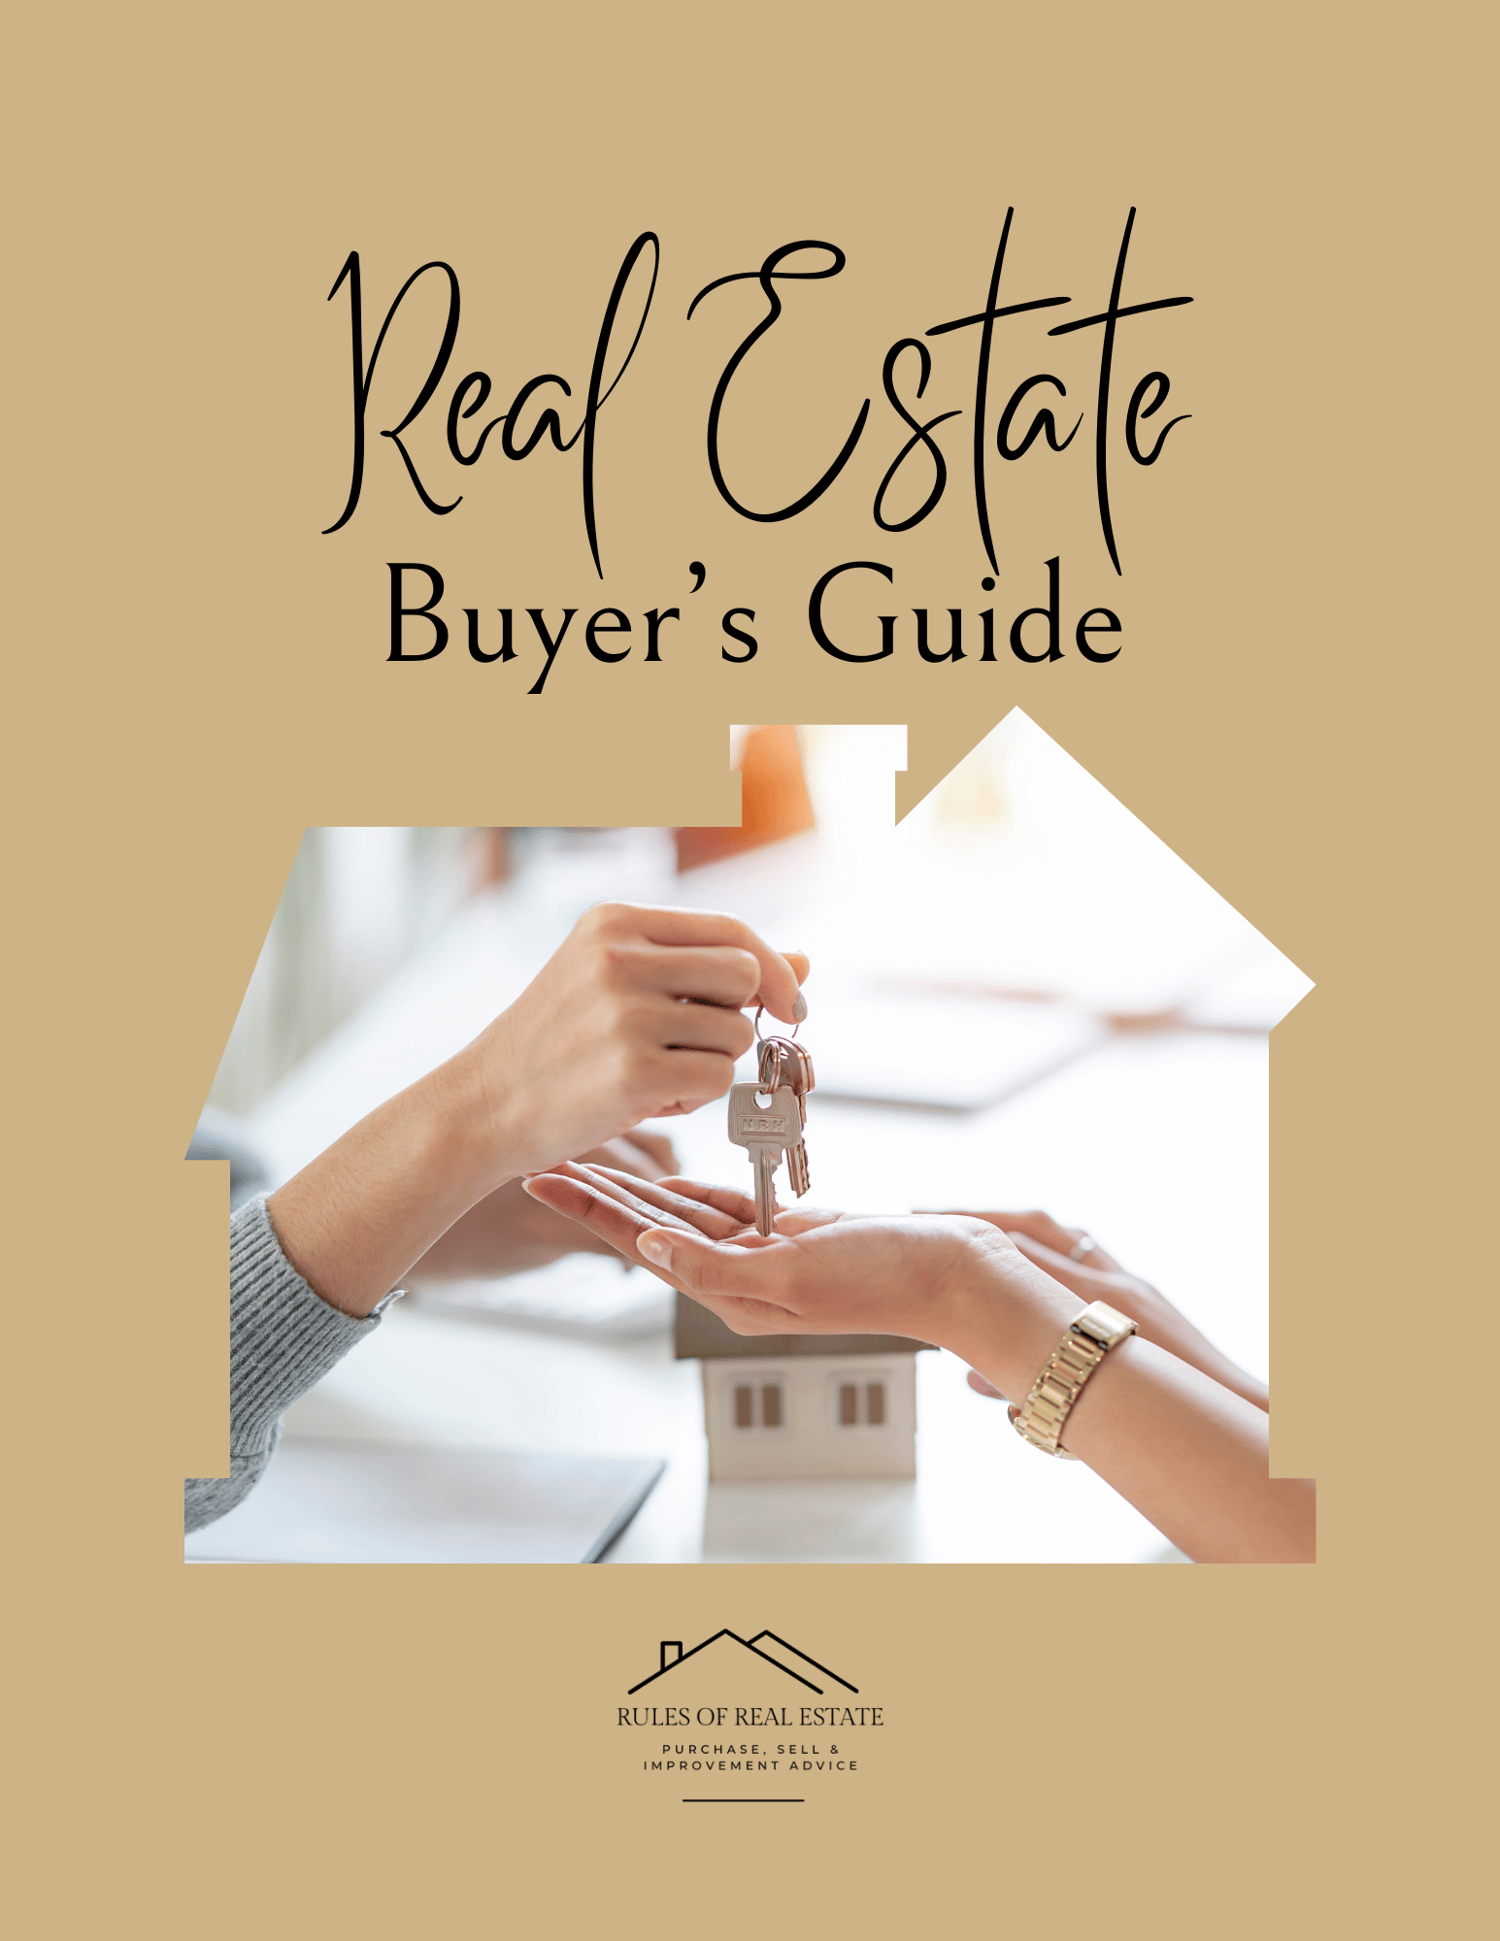 Real Estate Buying Guide for new home buyers that is packed with resources that you can use to buy your home. It includes a timeline, neighborhood assessment, negotiation worksheet and all the to dos to get to the closing table.